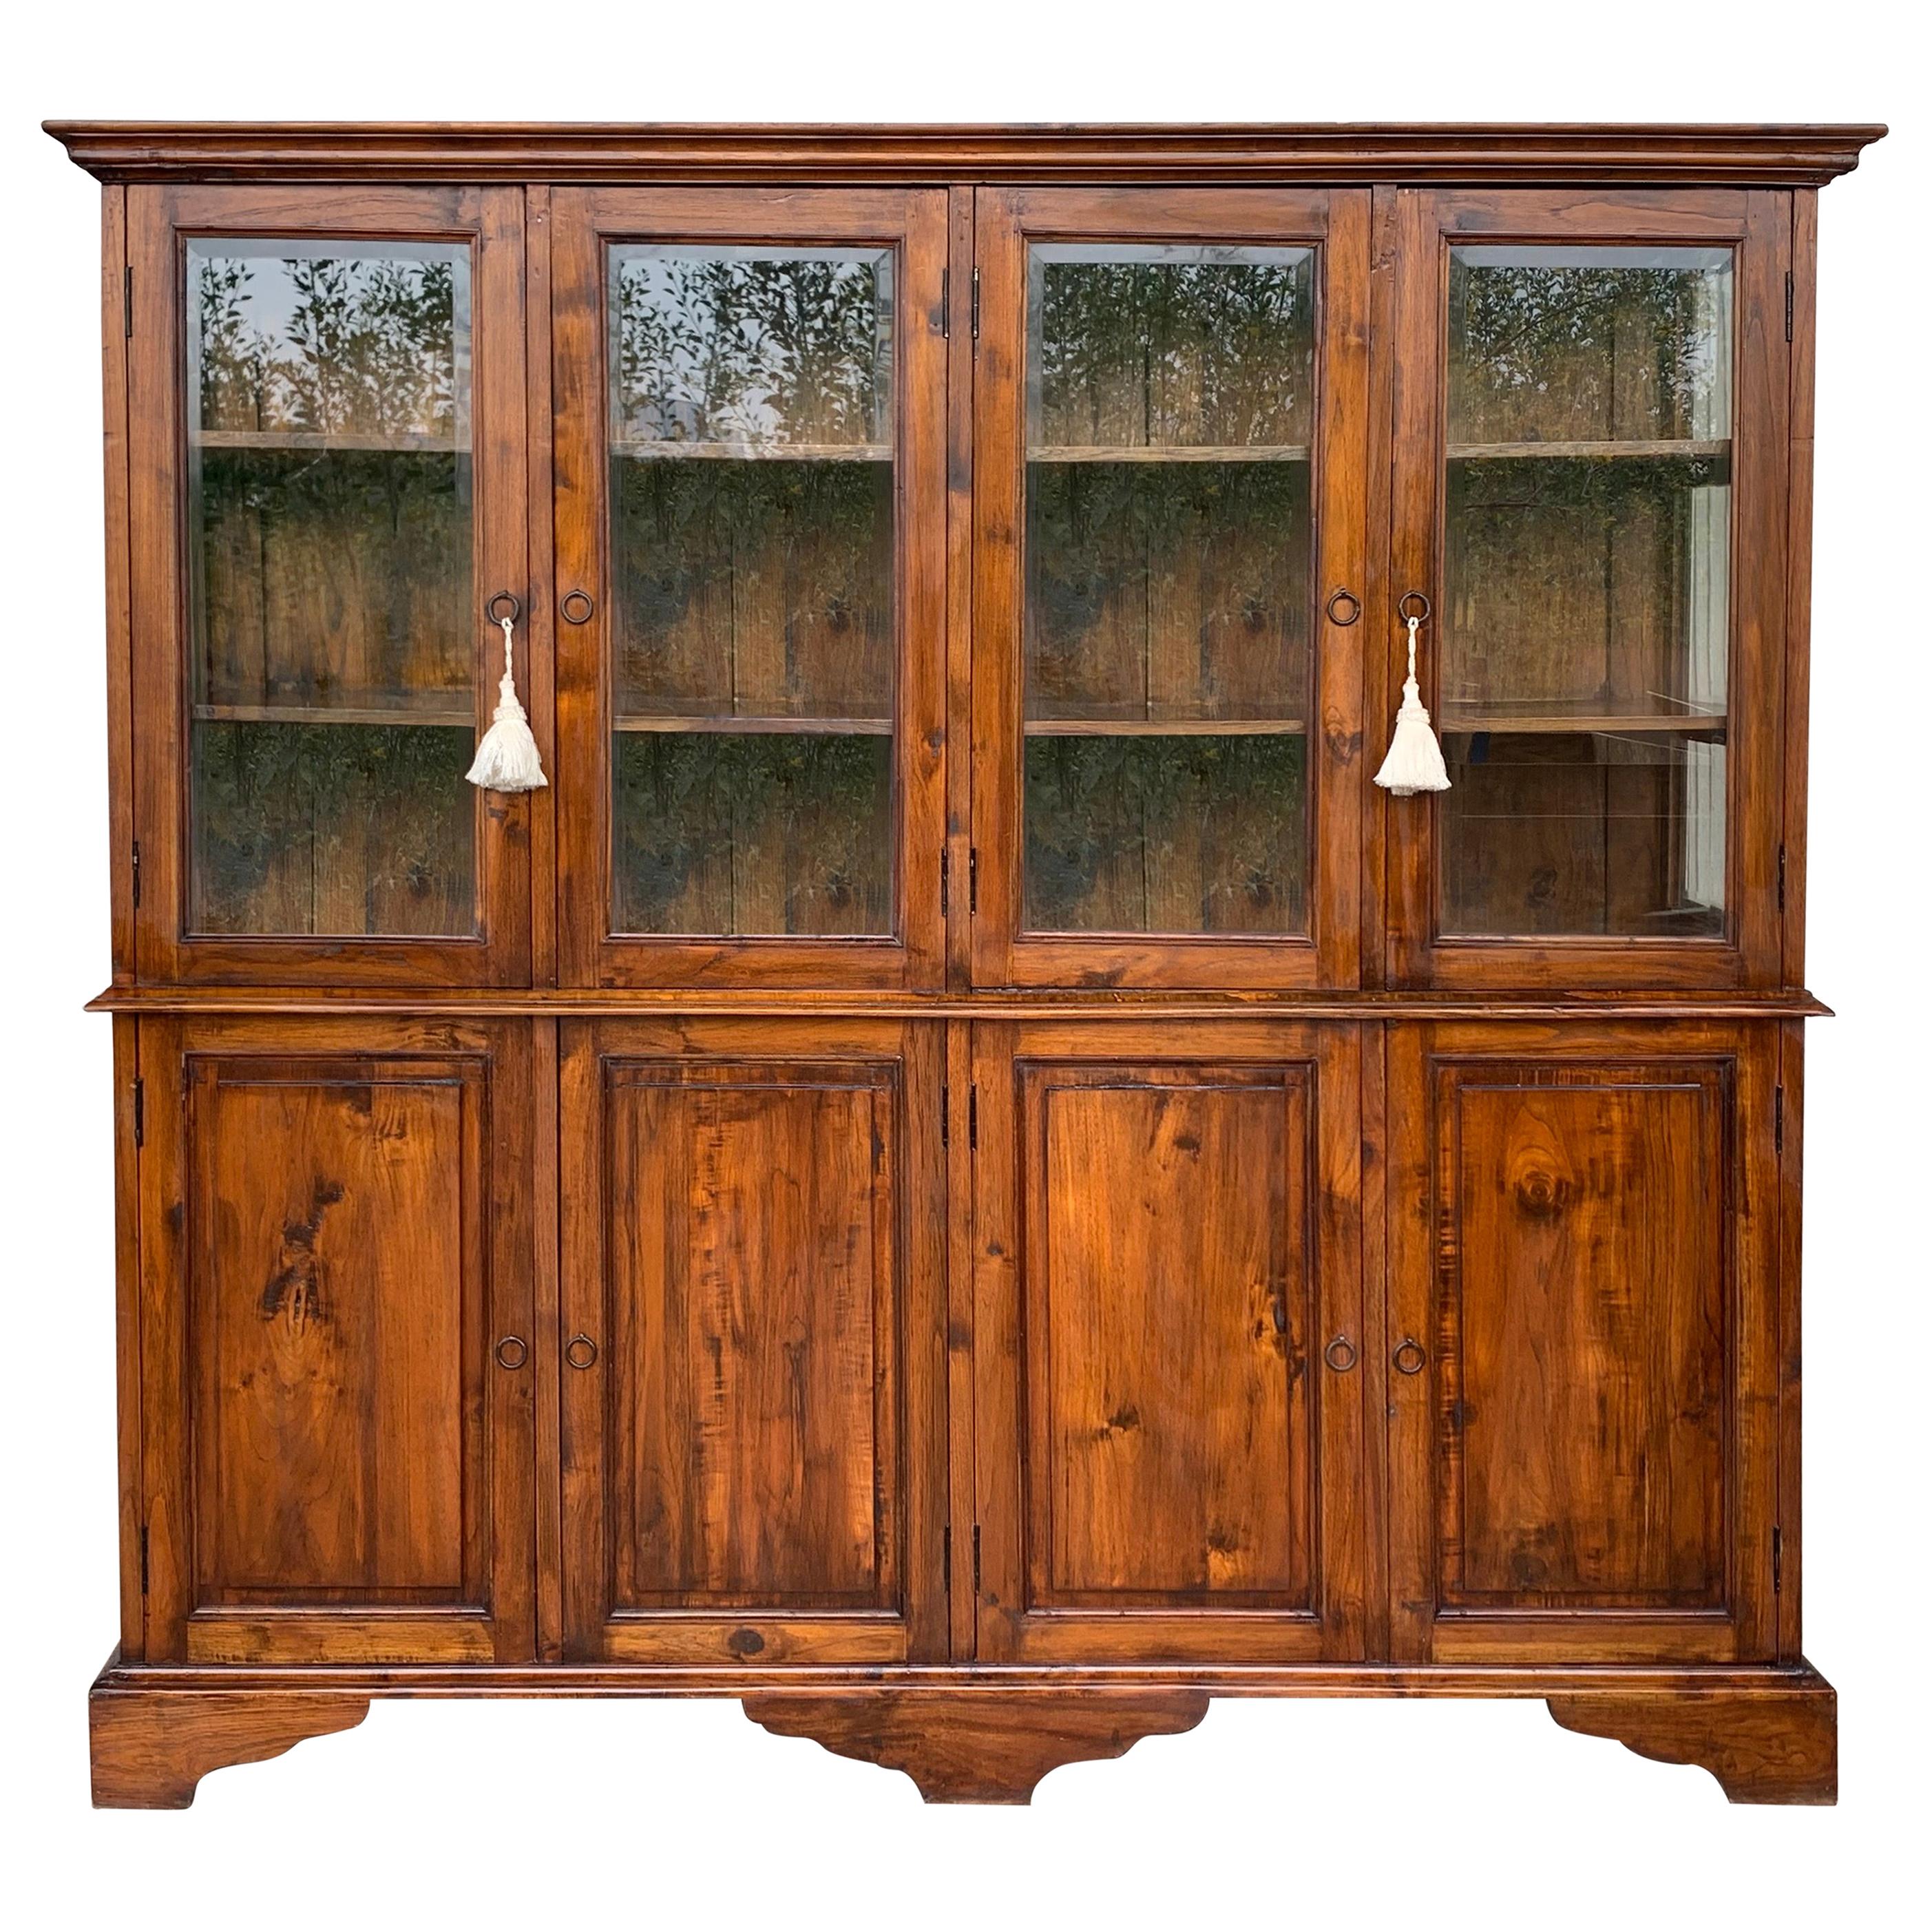 19th Century Large Cupboard or Bookcase with Glass Vitrine, Pine, Spain Restored